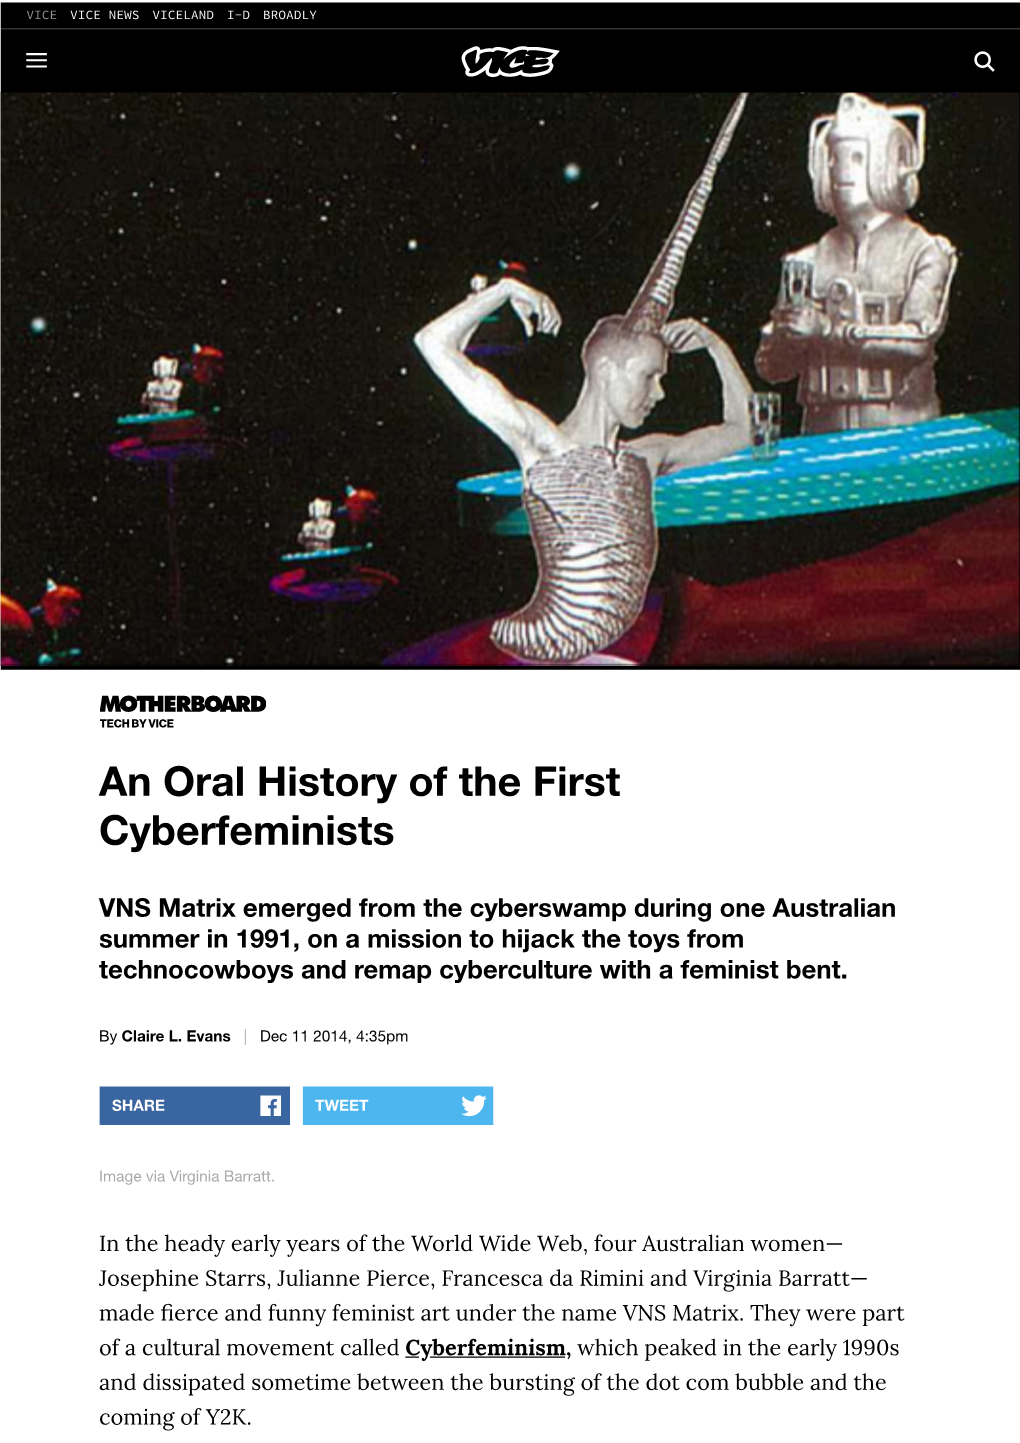 An Oral History of the First Cyberfeminists